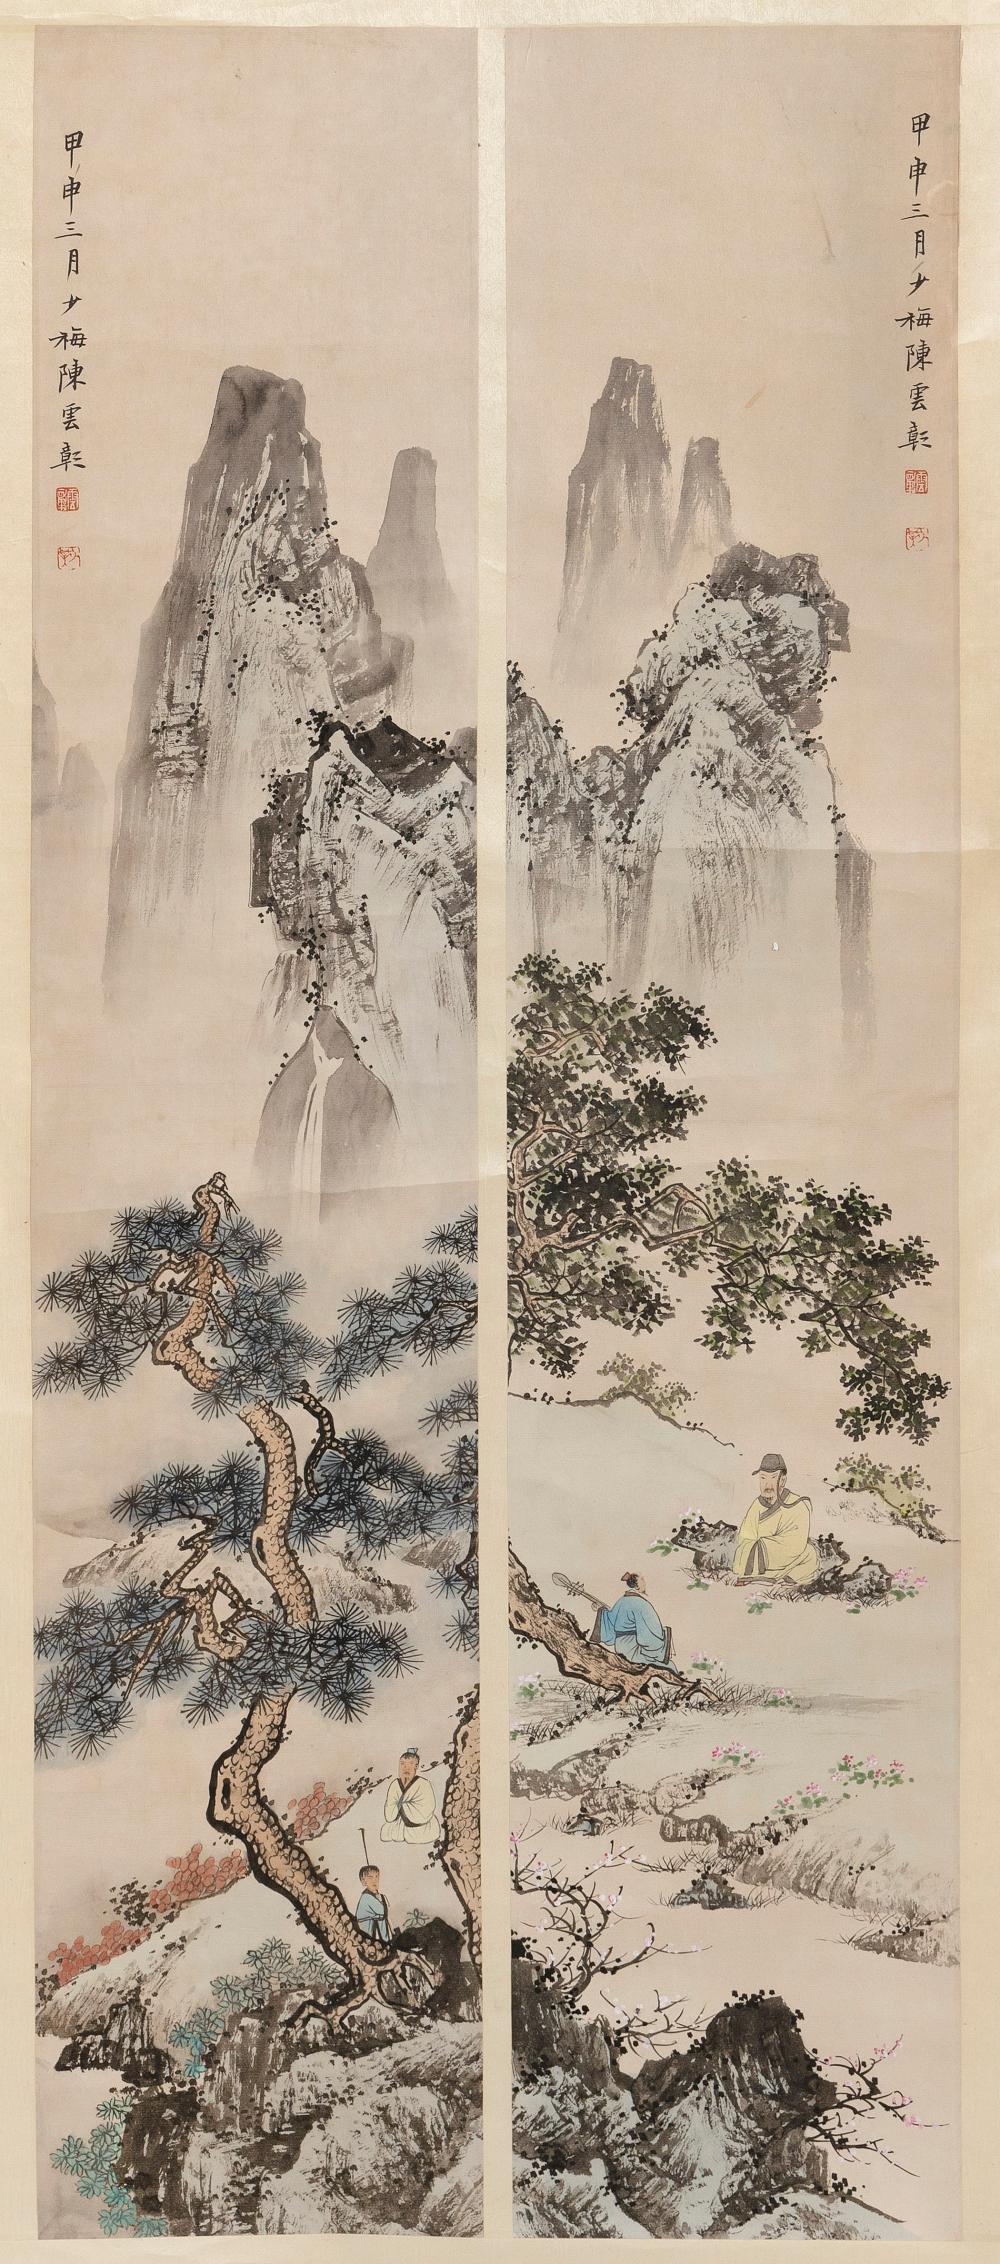 CHINESE SCROLL PAINTINGS ON PAPER 34c27d